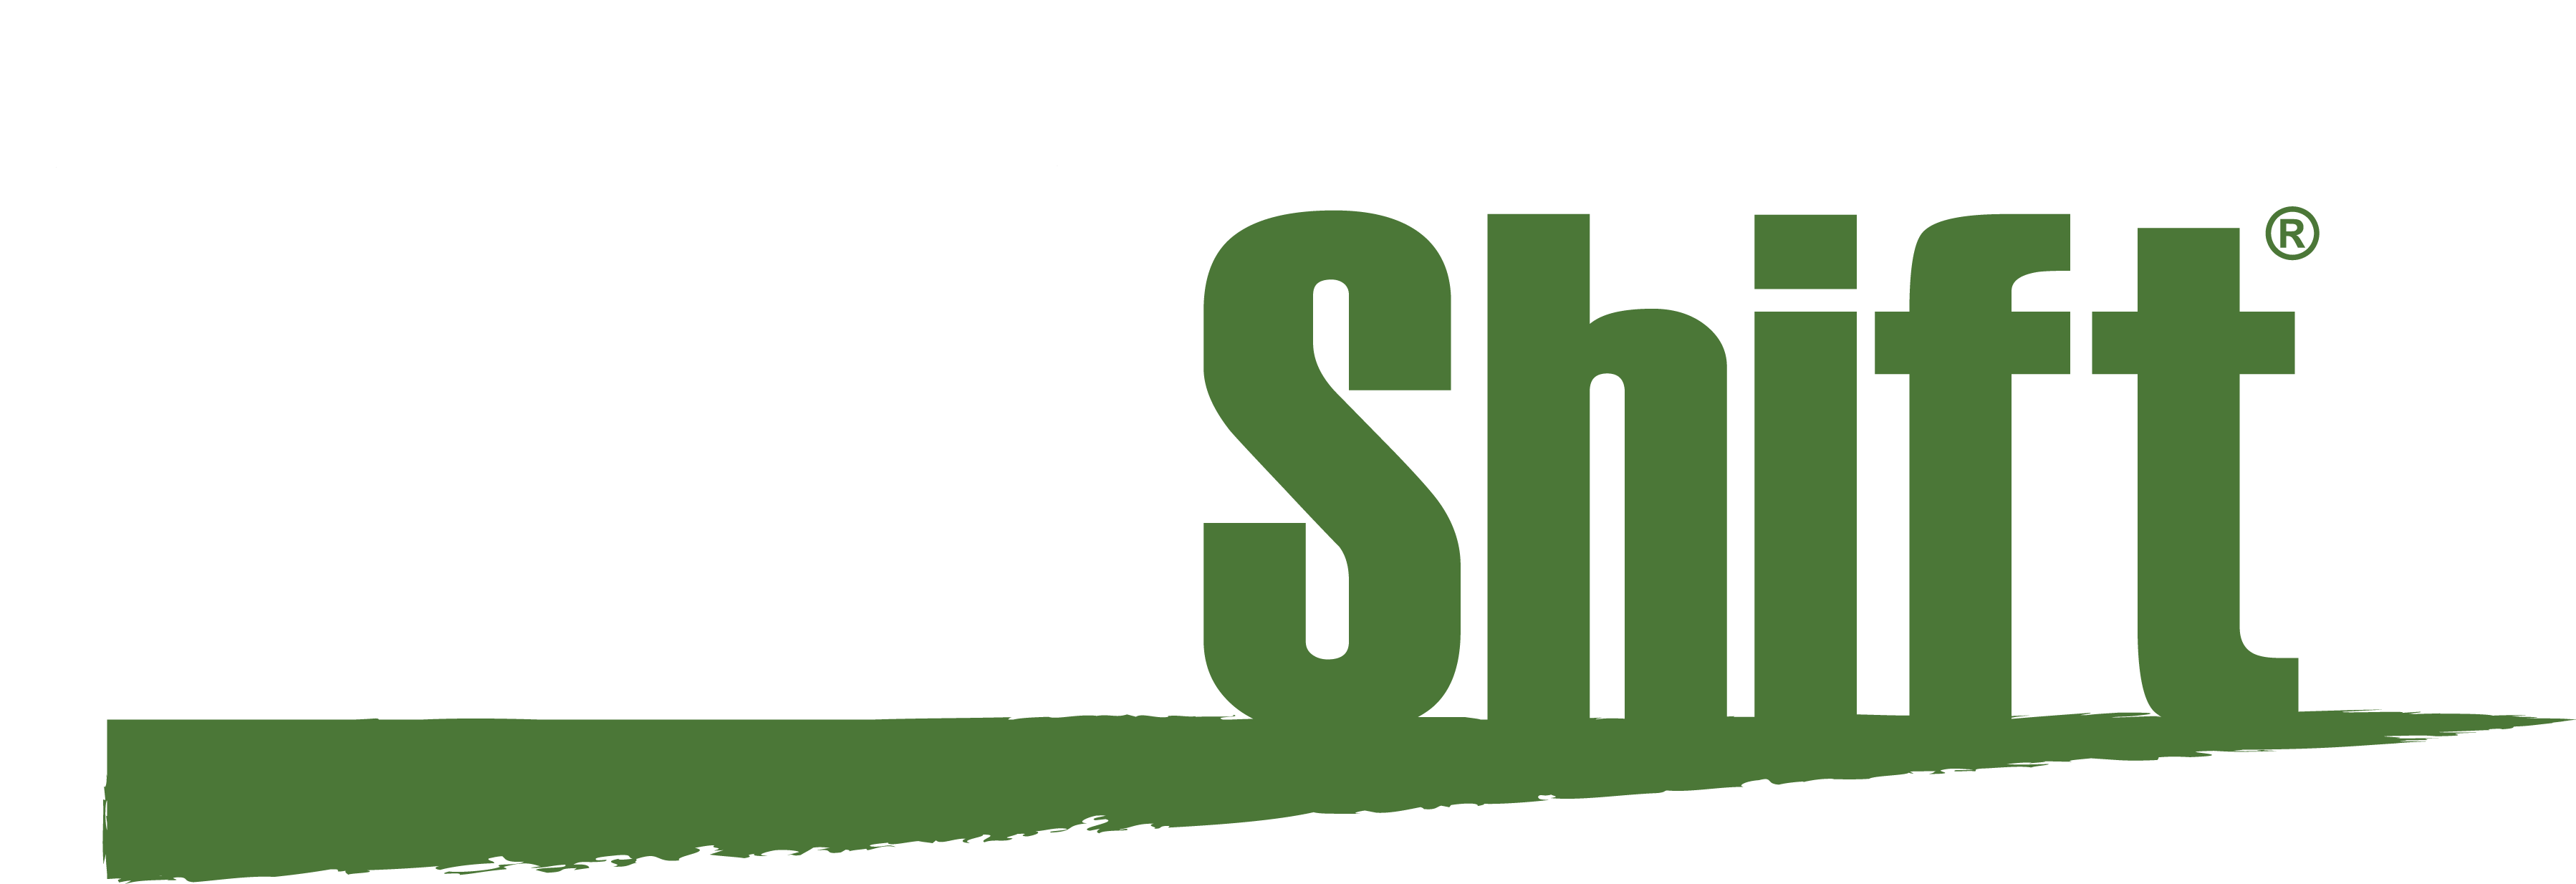 Please Join Our Mailing List For Updates On New Products - Mindshift Gear Logo (3596x1234)